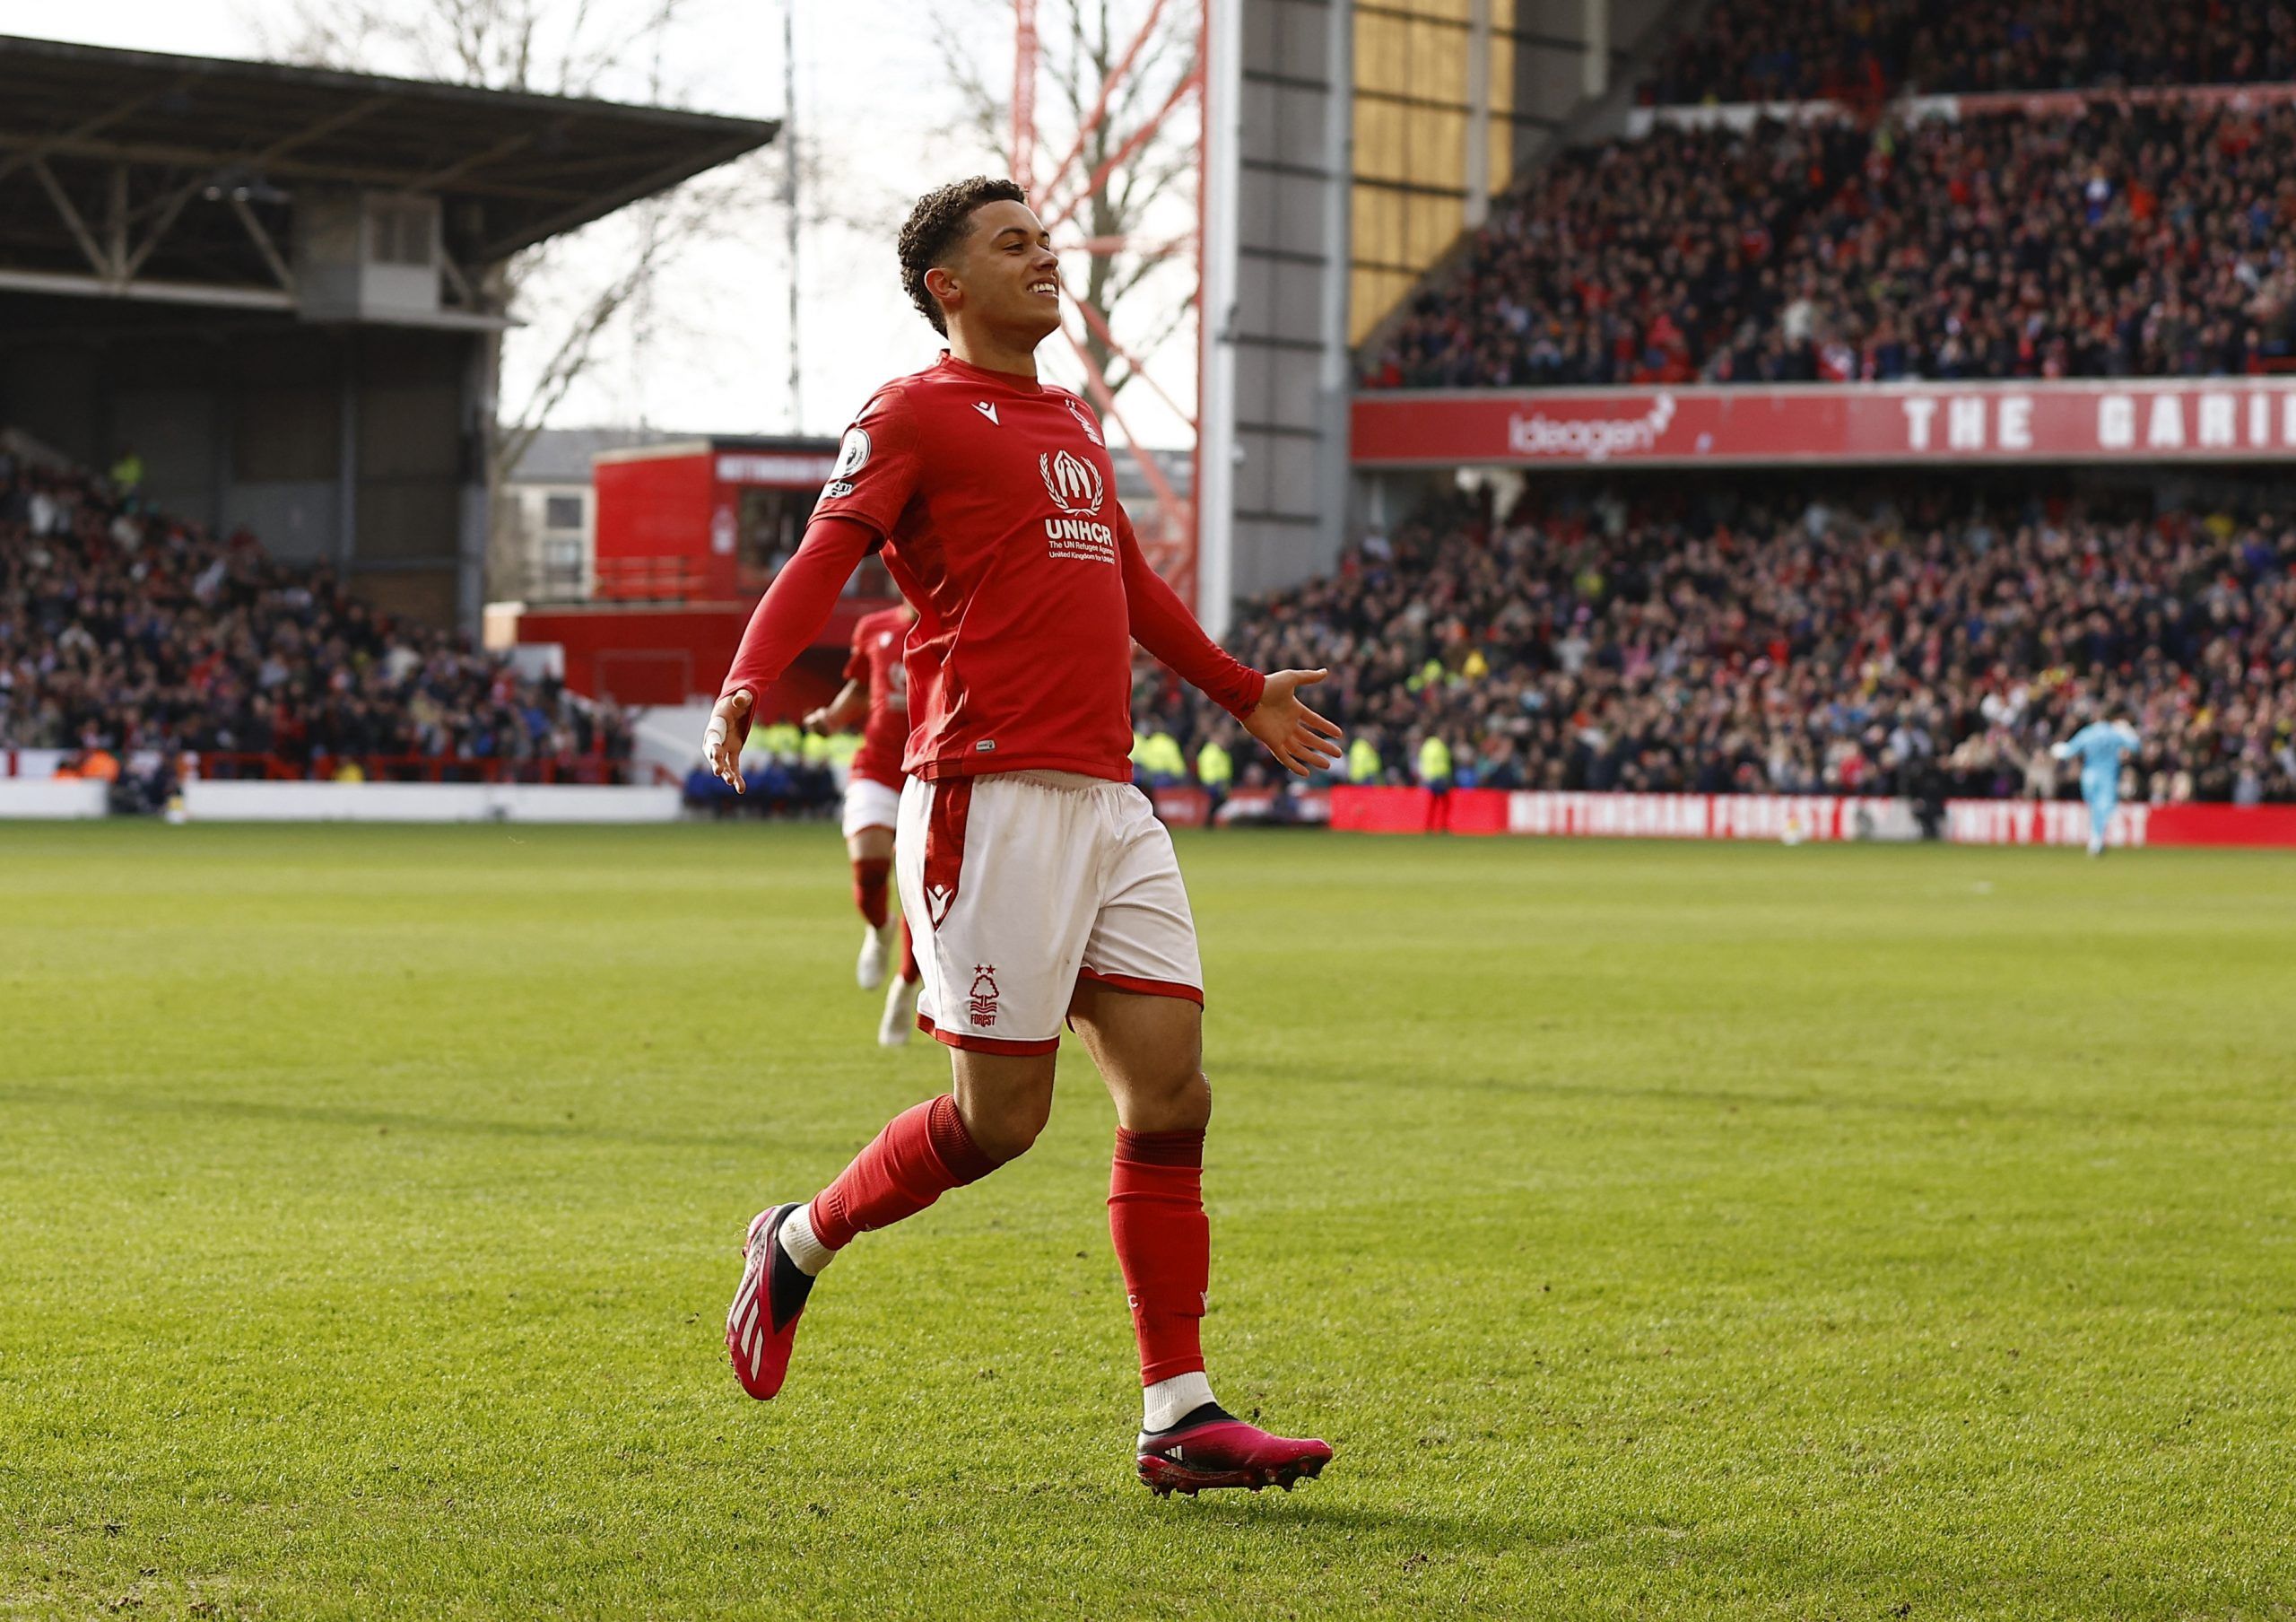 Soccer Football - Premier League - Nottingham Forest v Leeds United - The City Ground, Nottingham, Britain - February 5, 2023 Nottingham Forest's Brennan Johnson celebrates scoring their first goal Action Images via Reuters/Jason Cairnduff EDITORIAL USE ONLY. No use with unauthorized audio, video, data, fixture lists, club/league logos or 'live' services. Online in-match use limited to 75 images, no video emulation. No use in betting, games or single club /league/player publications.  Please con